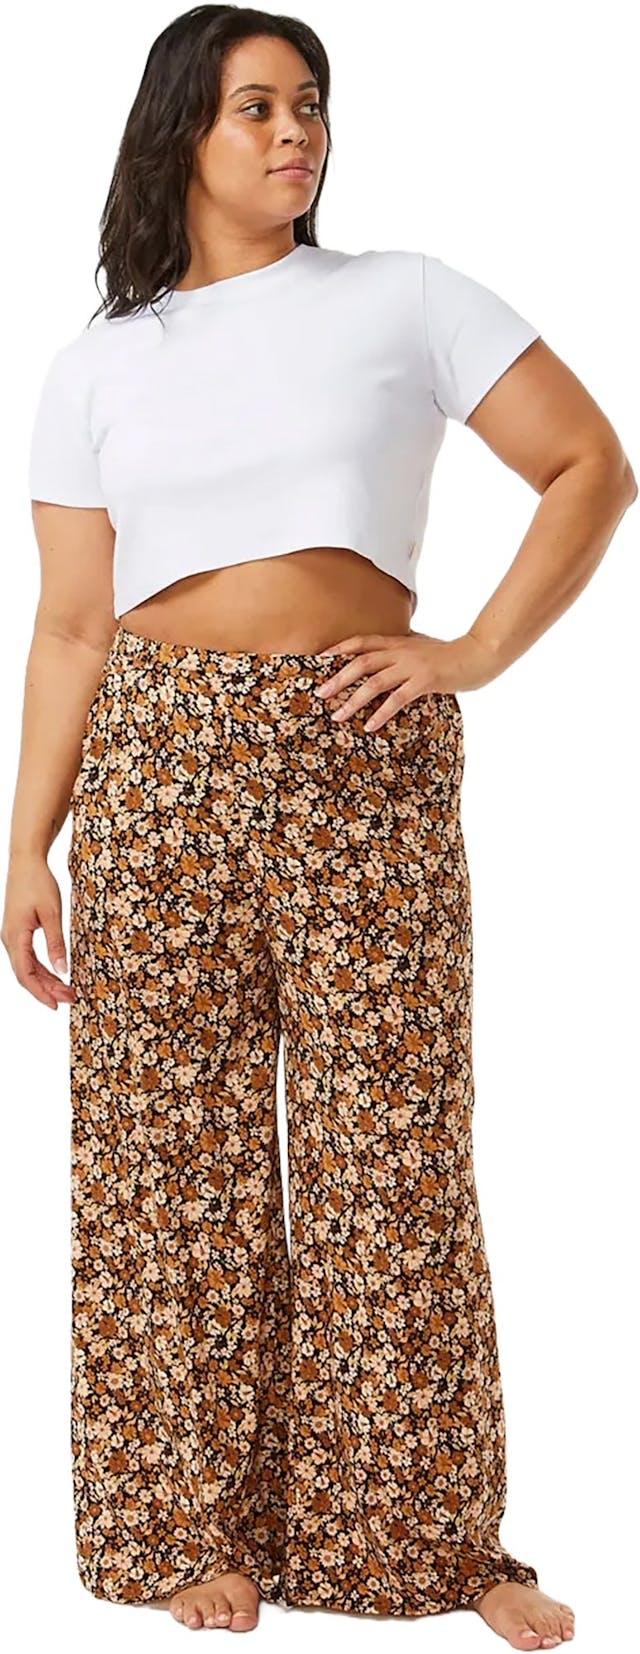 Product image for Sea Of Dreams Pant - Women's